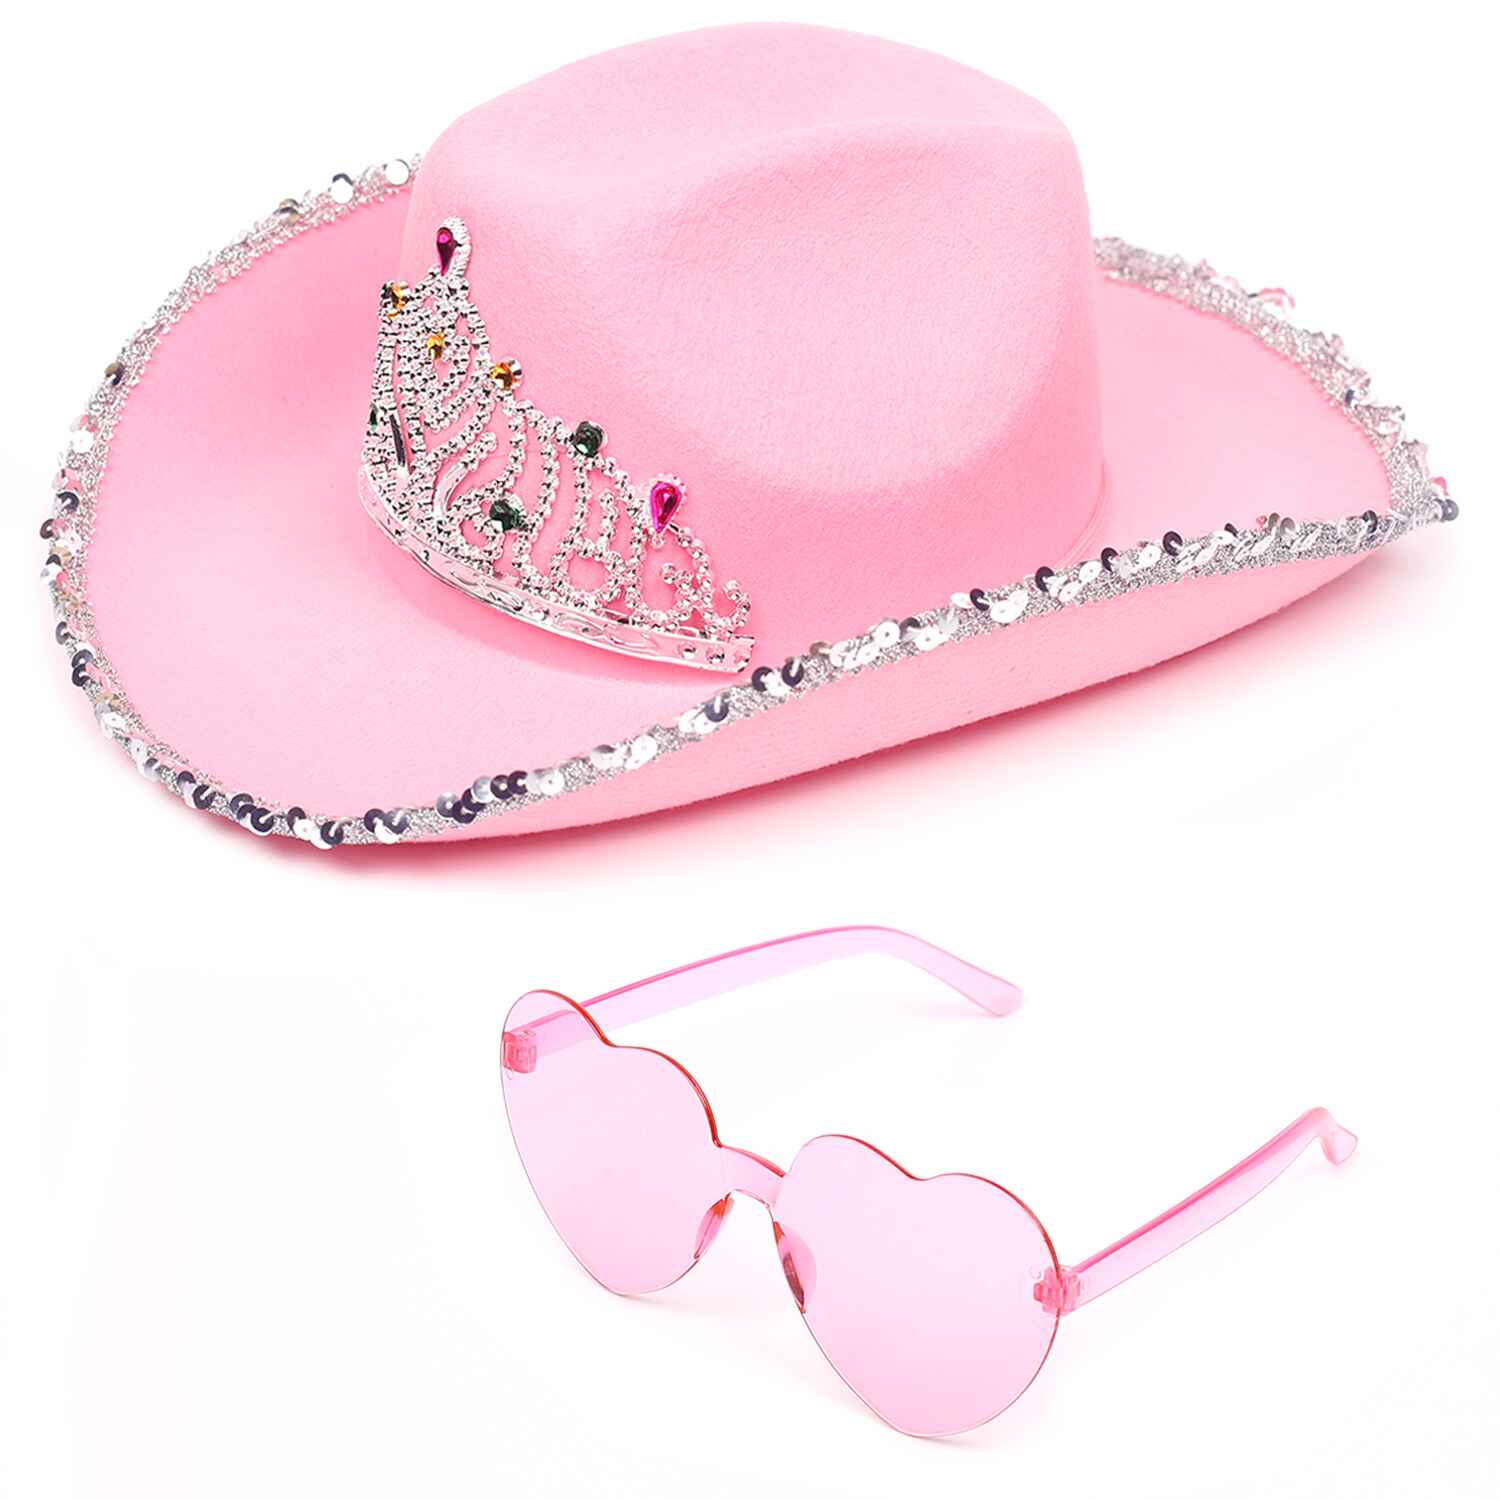 Funcredible Pink Cowgirl Hat with Heart Glasses - Pink Cowboy Hat with Tiara Crown